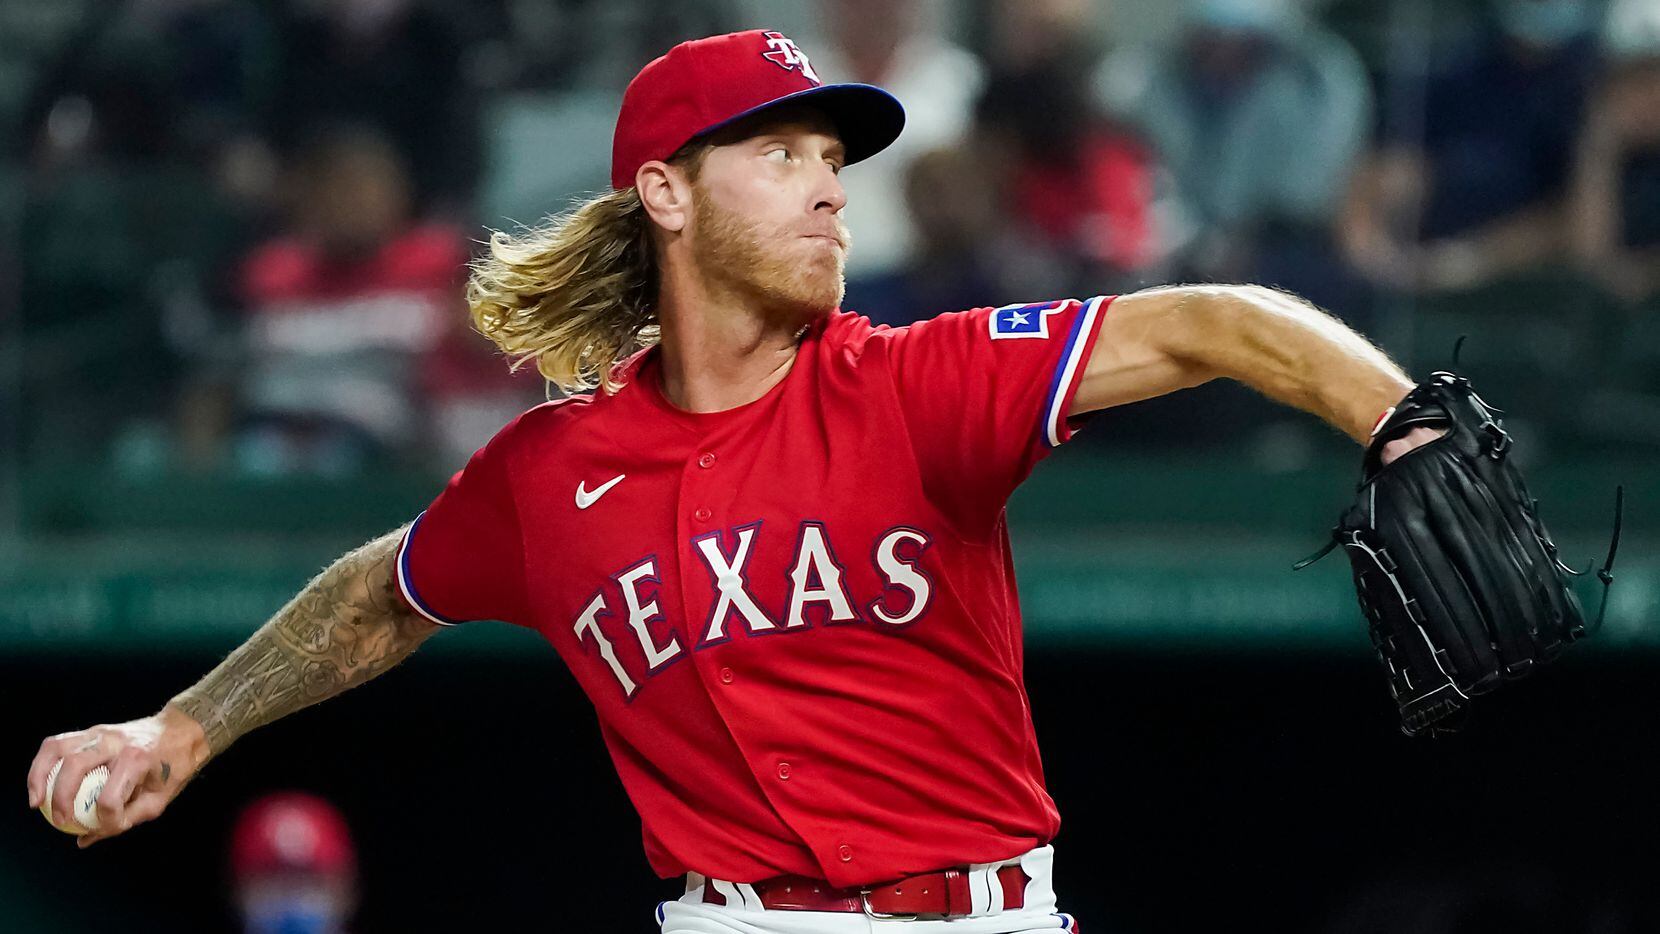 Texas Rangers pitcher Mike Foltynewicz delivers during the third inning against the Baltimore Orioles at Globe Life Field on Friday, April 16, 2021.